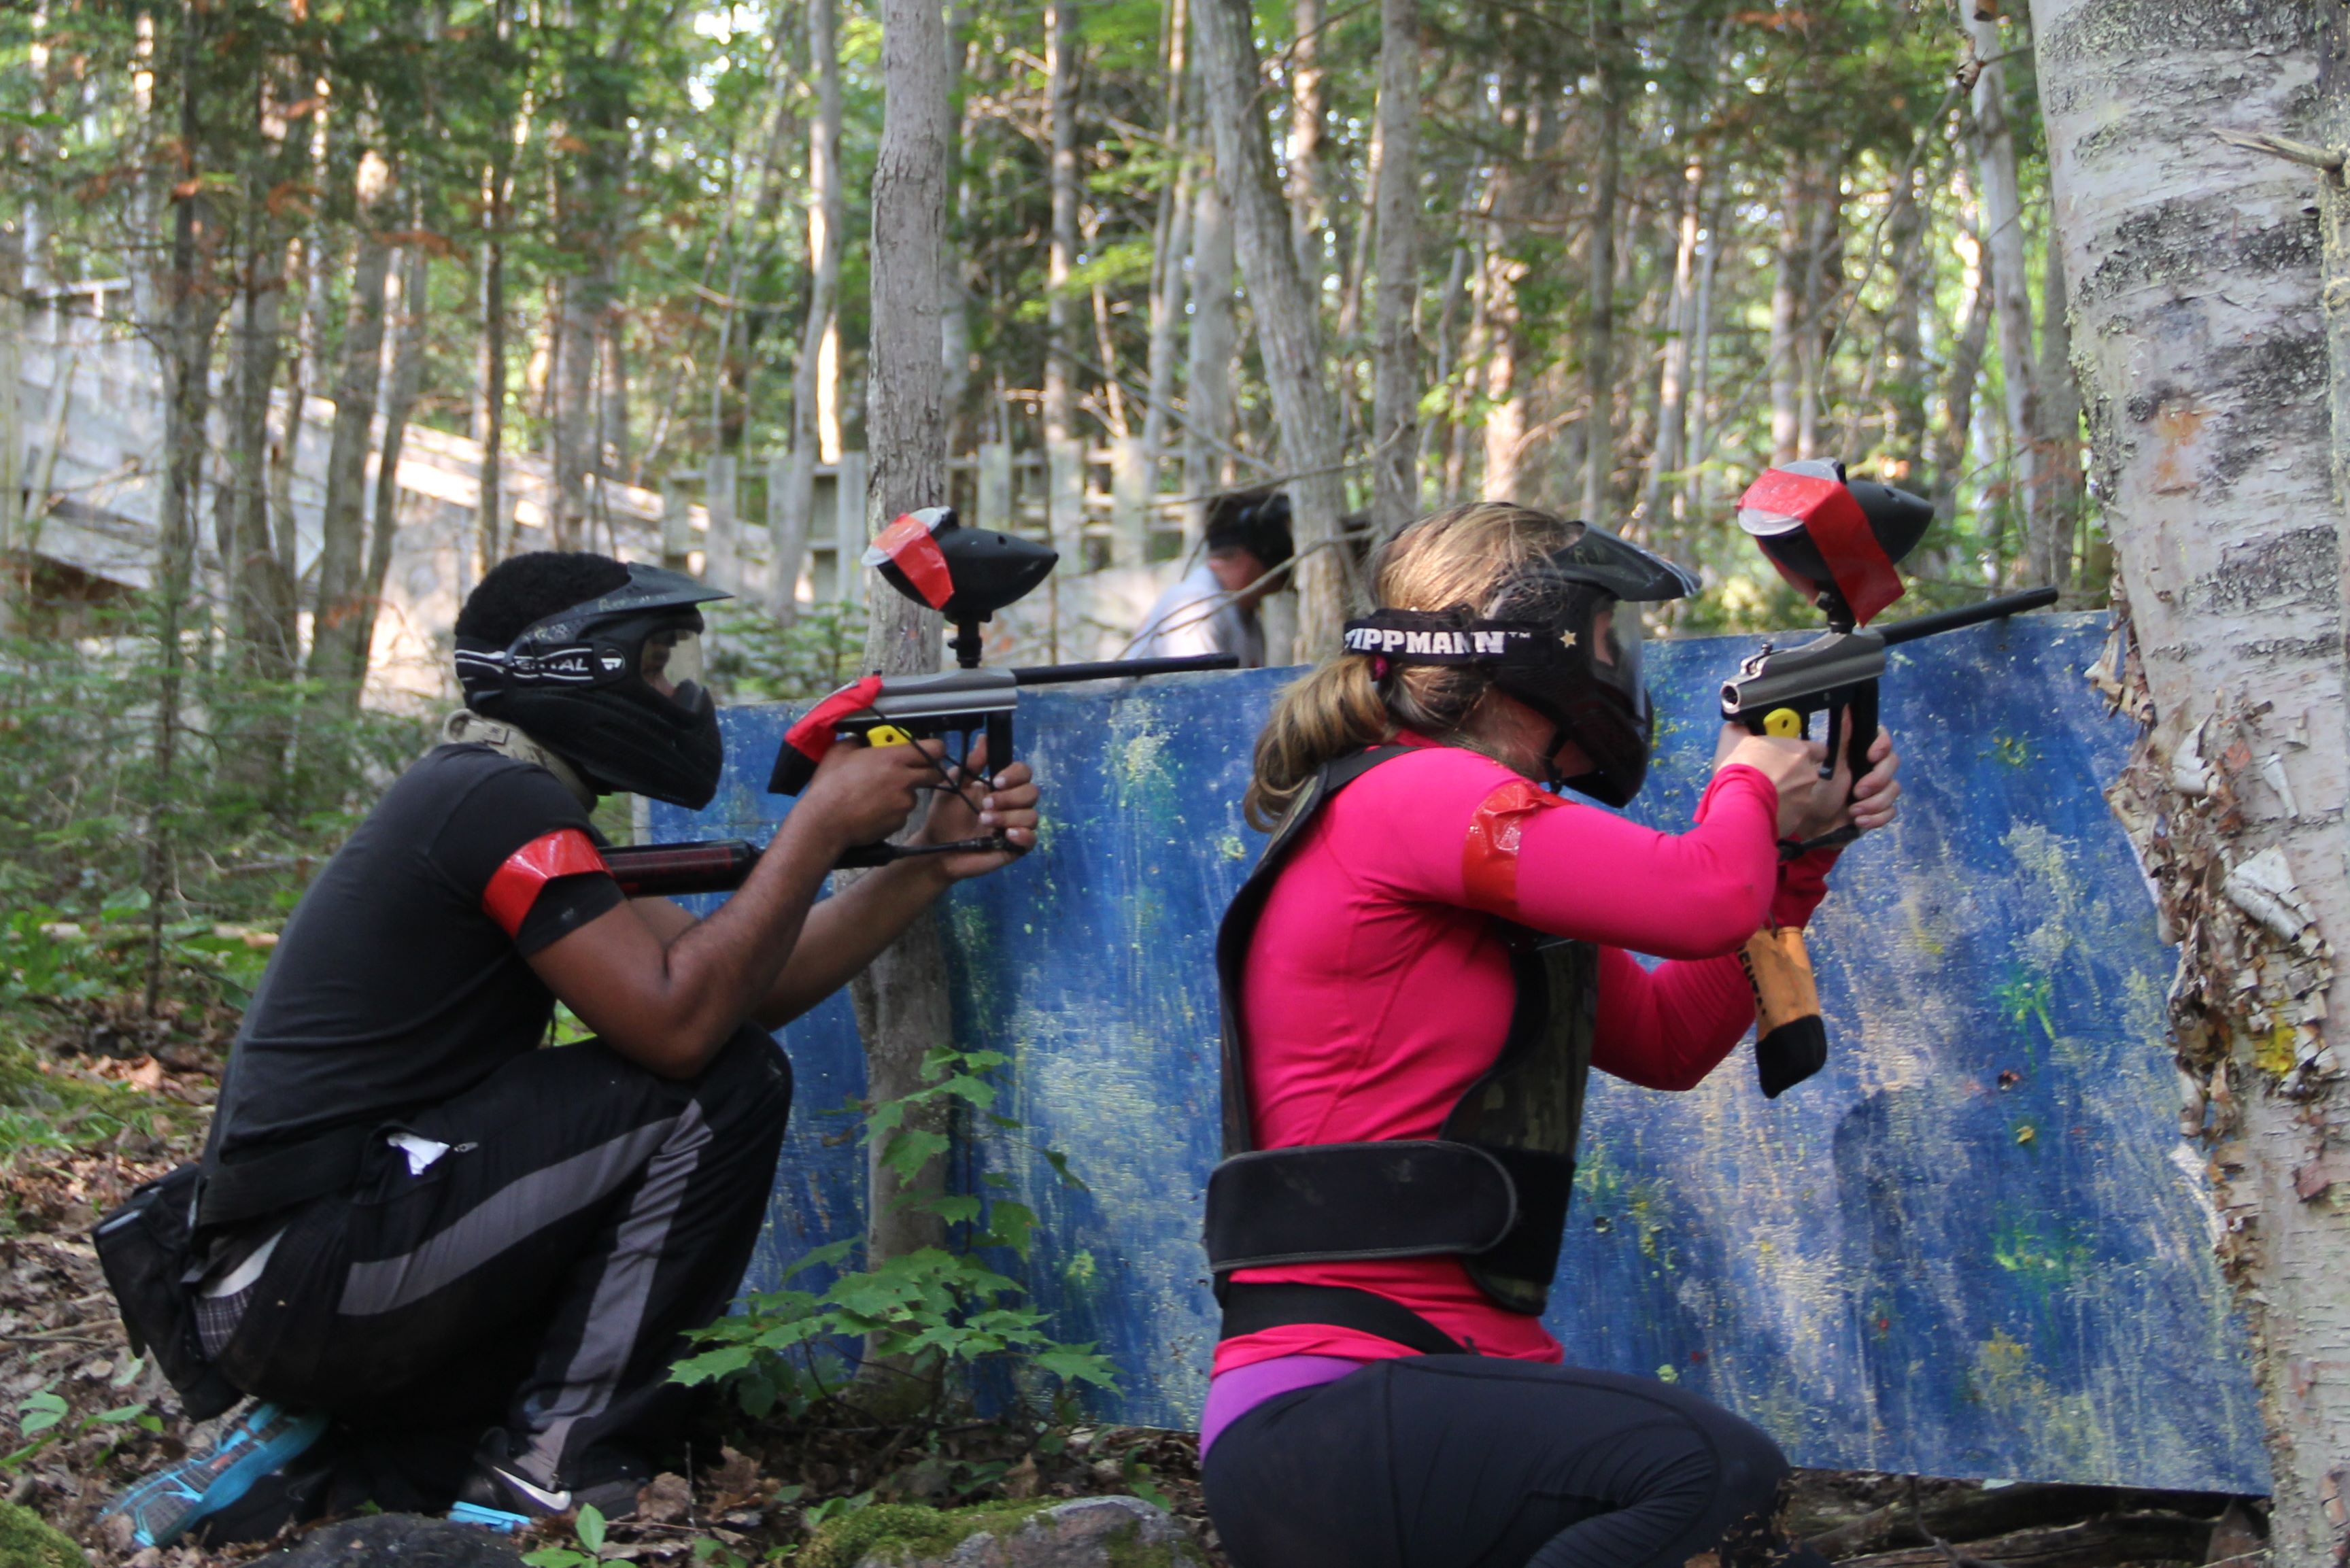 Paintballing the Town Red (or Blue or Green) in Bonfield